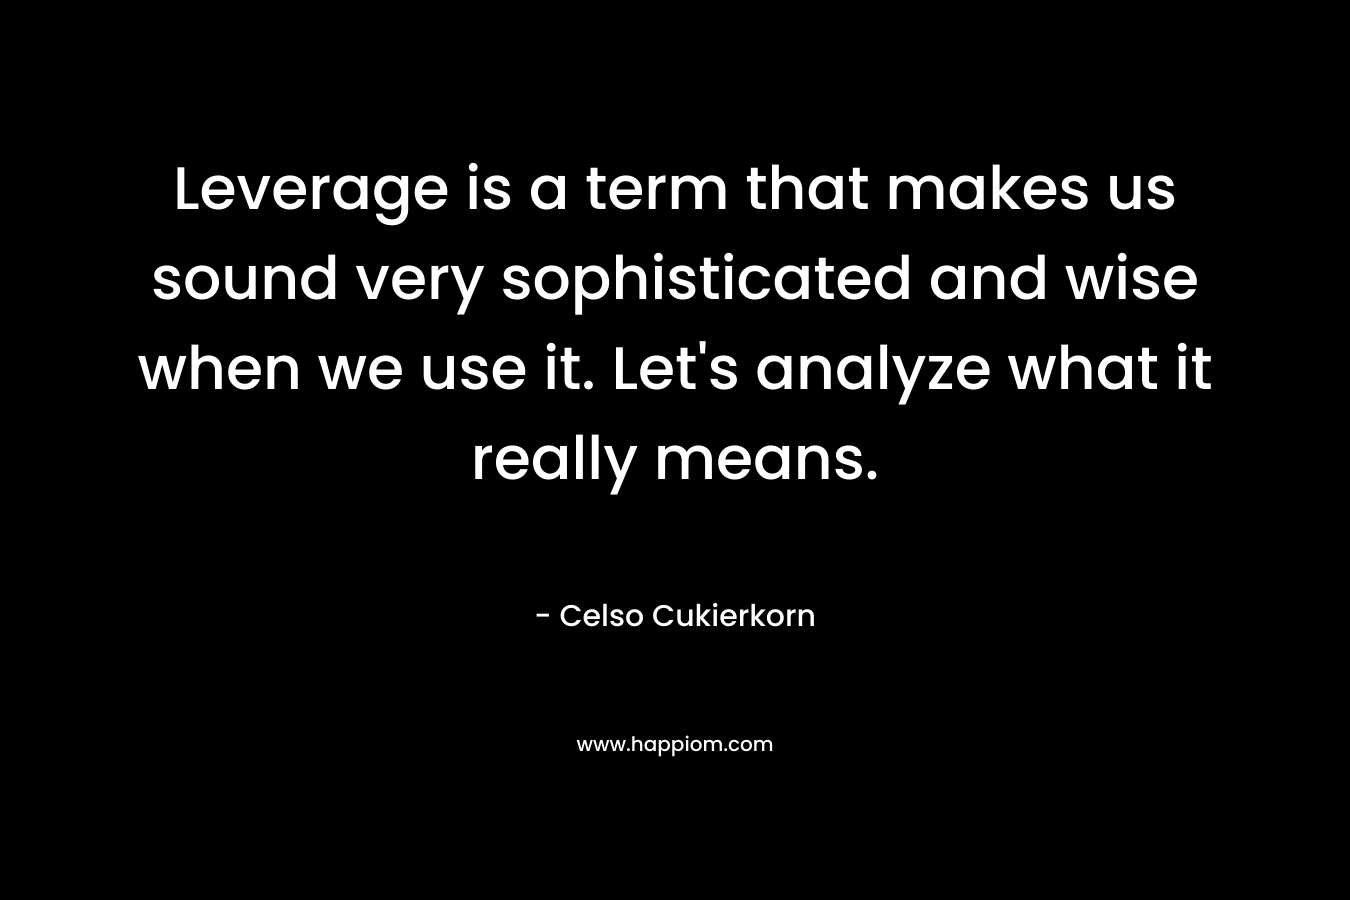 Leverage is a term that makes us sound very sophisticated and wise when we use it. Let’s analyze what it really means. – Celso Cukierkorn